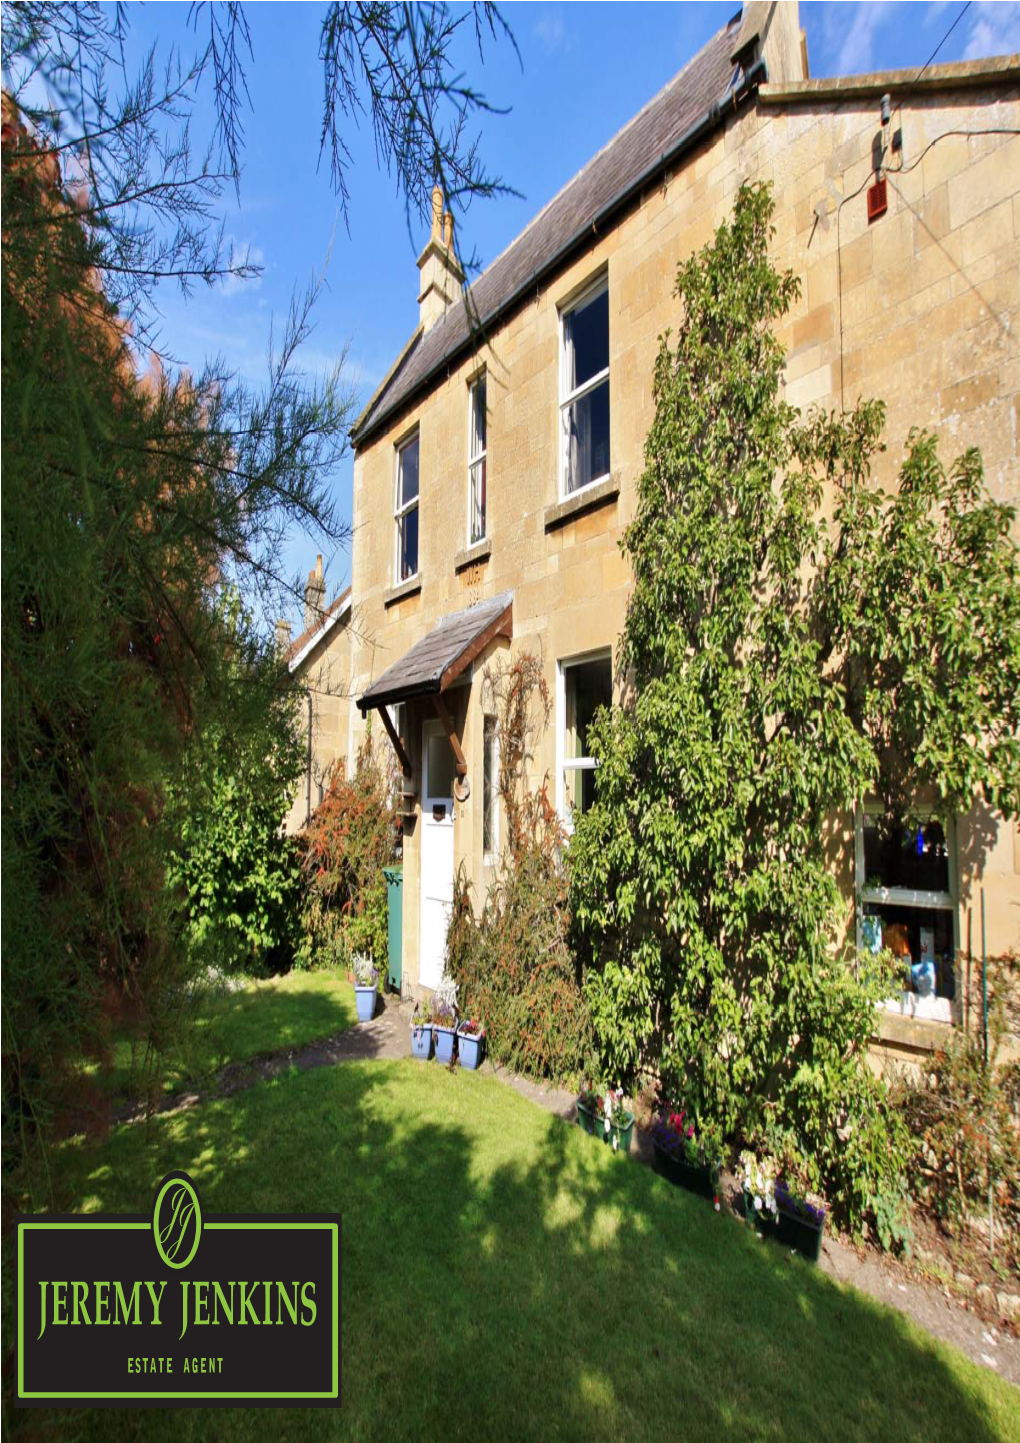 Stoneleaze, 31 Ashley Road, Bathford, BA1 7TT. Asking Price: £605,000 “Stoneleaze” Is a Handsome Detached Period Home Built in 1884 with Later Extensions